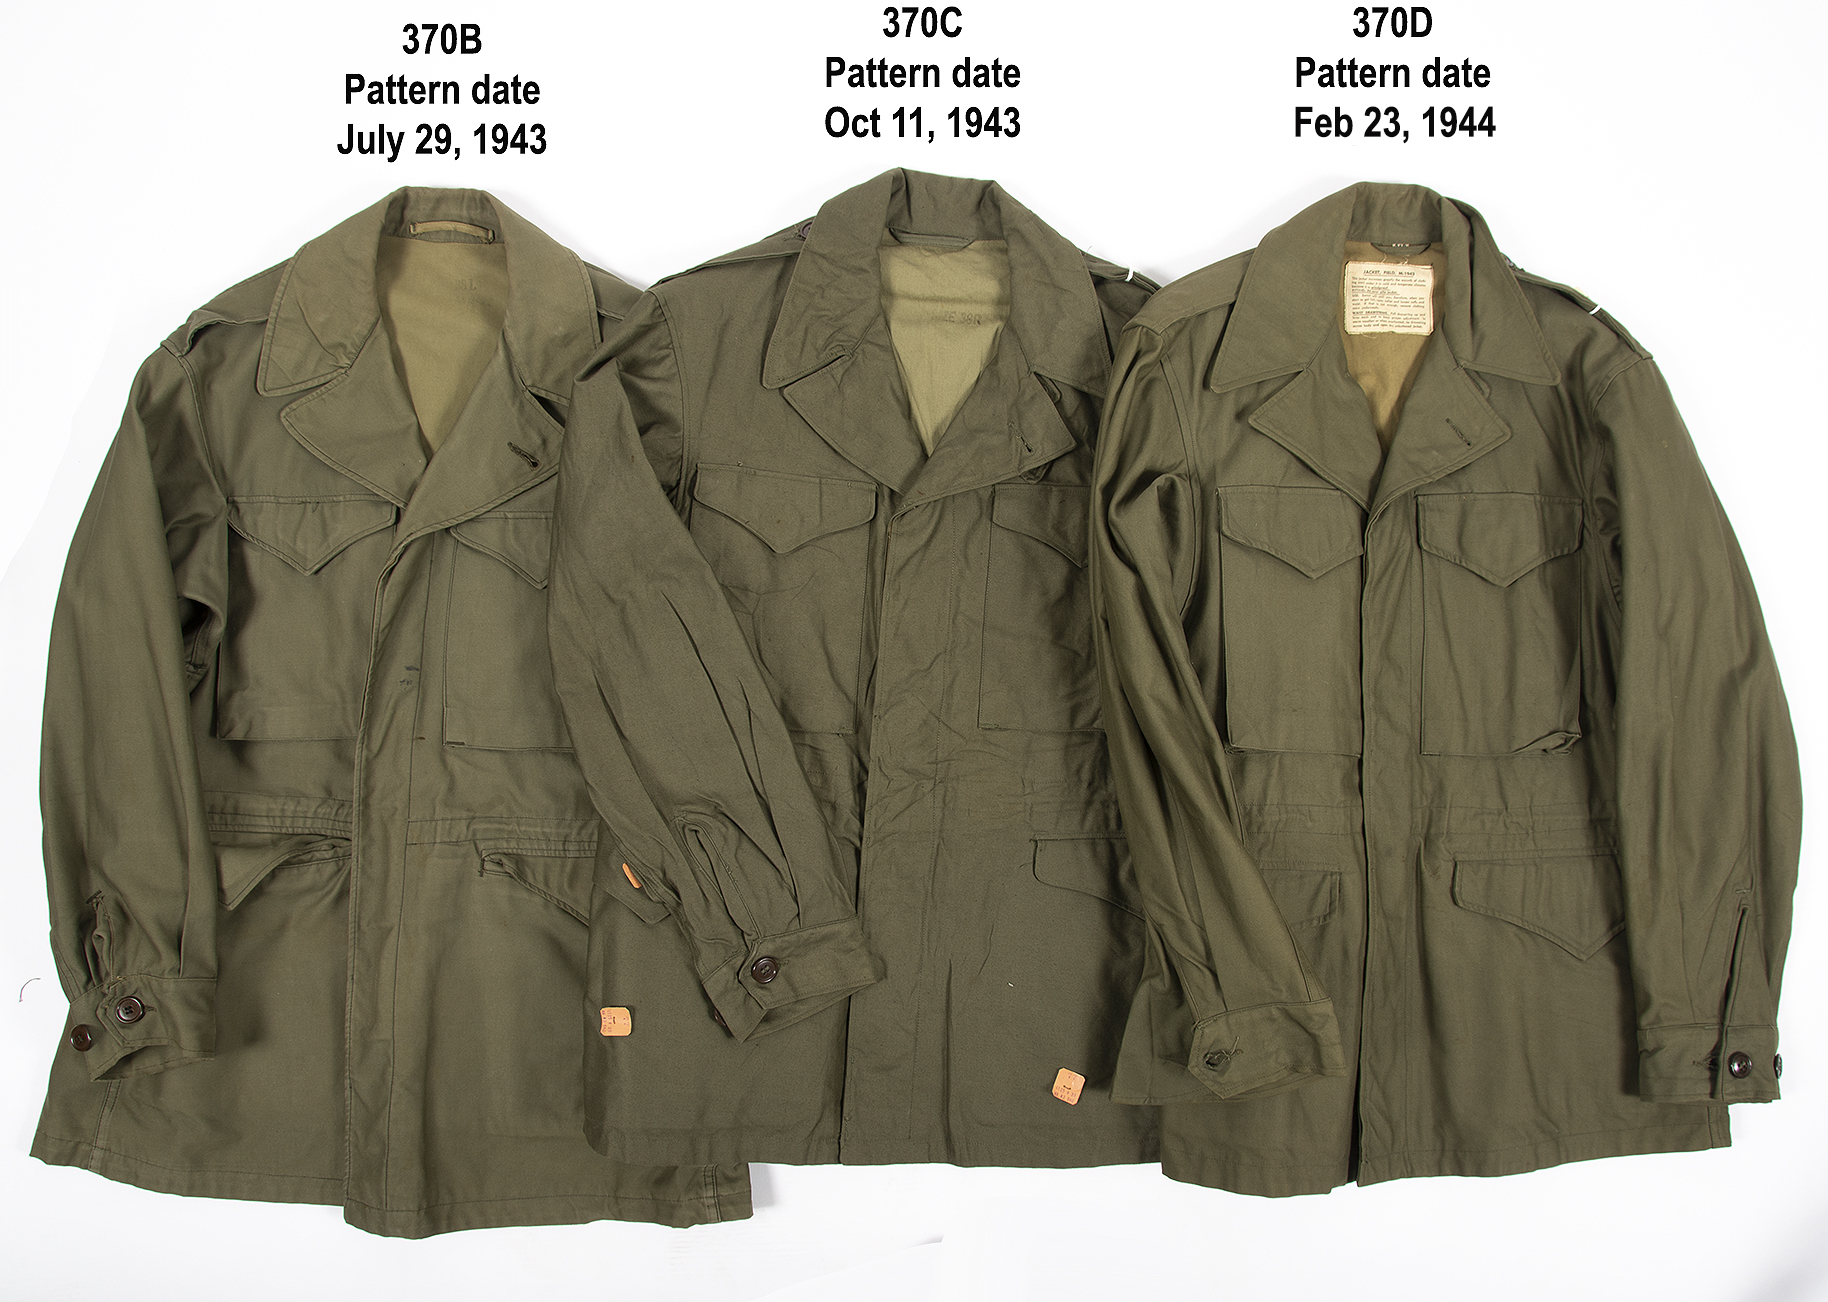 The M1943 Field Jacket - At The Front